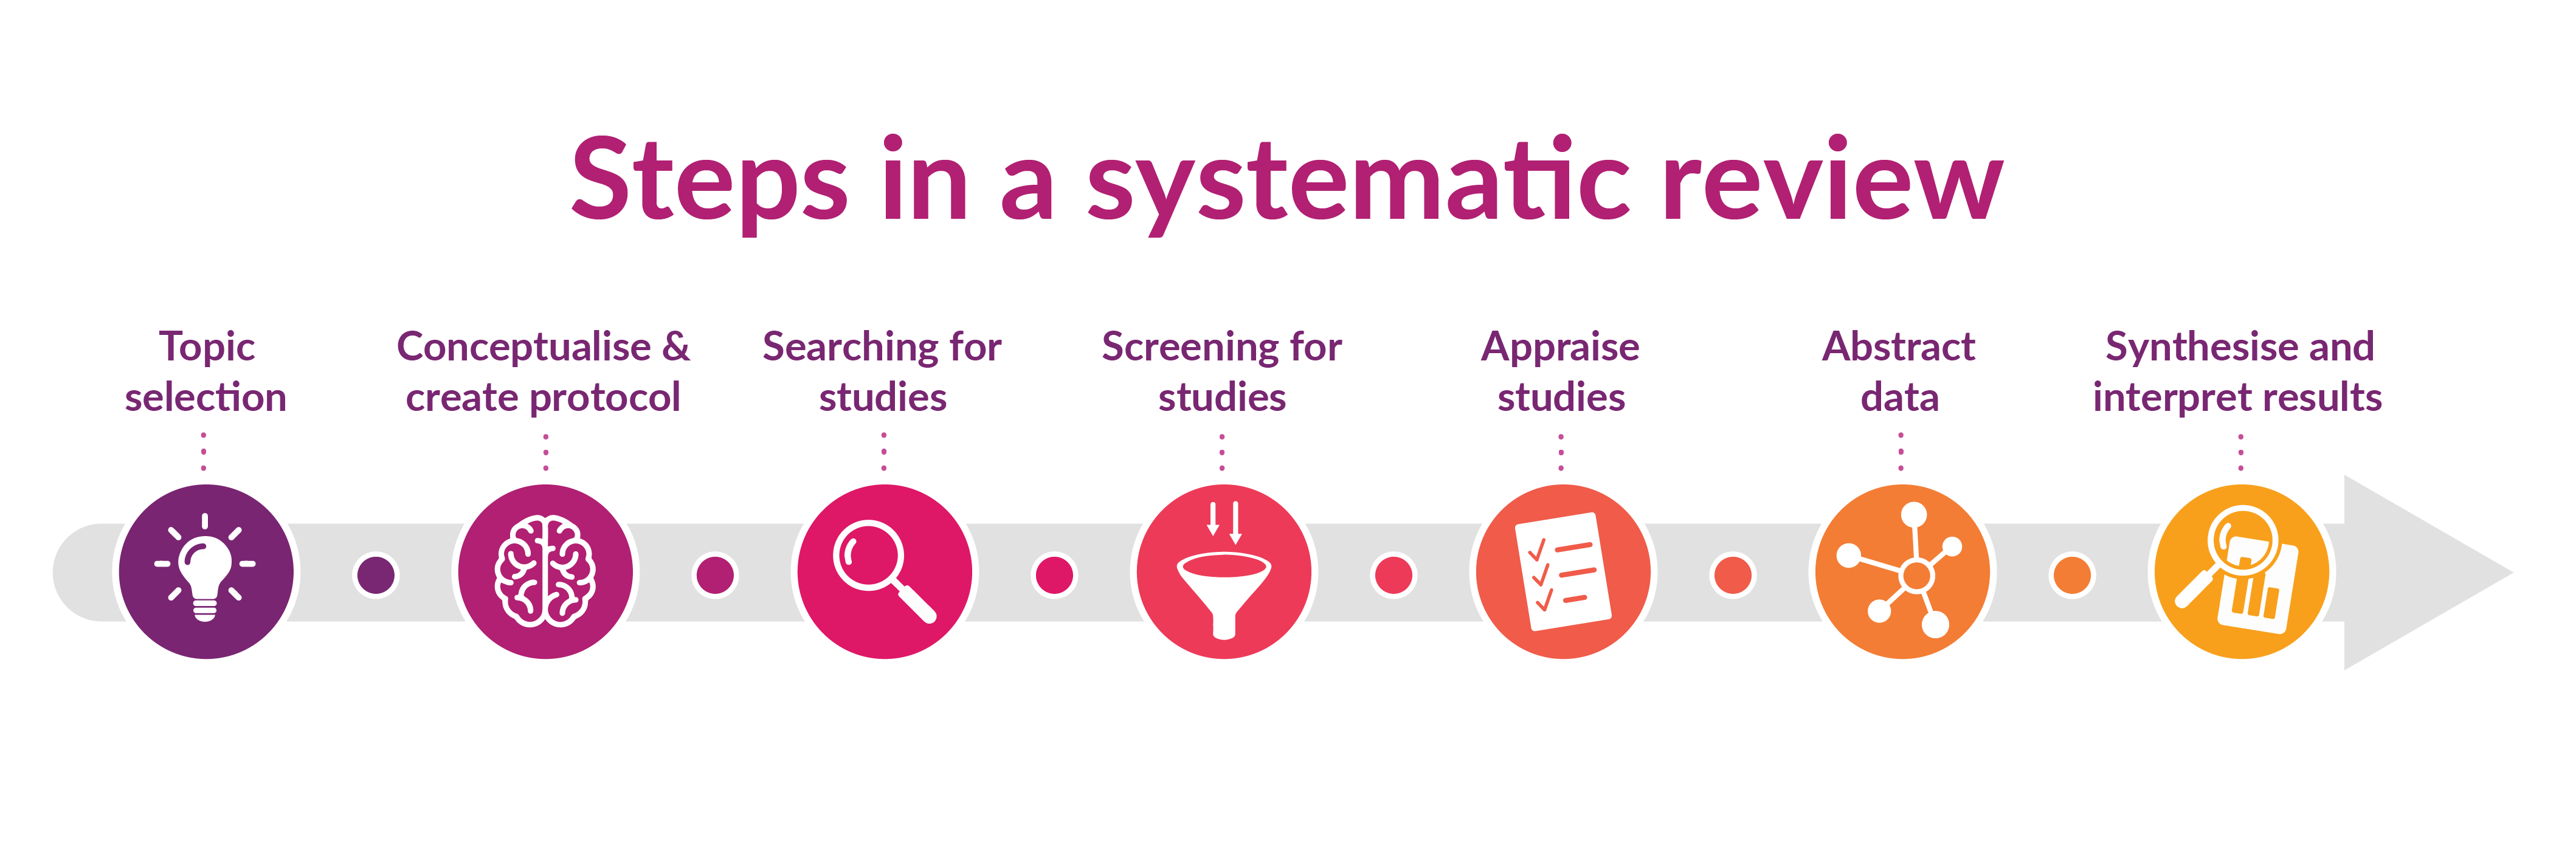 systematic literature review of studies